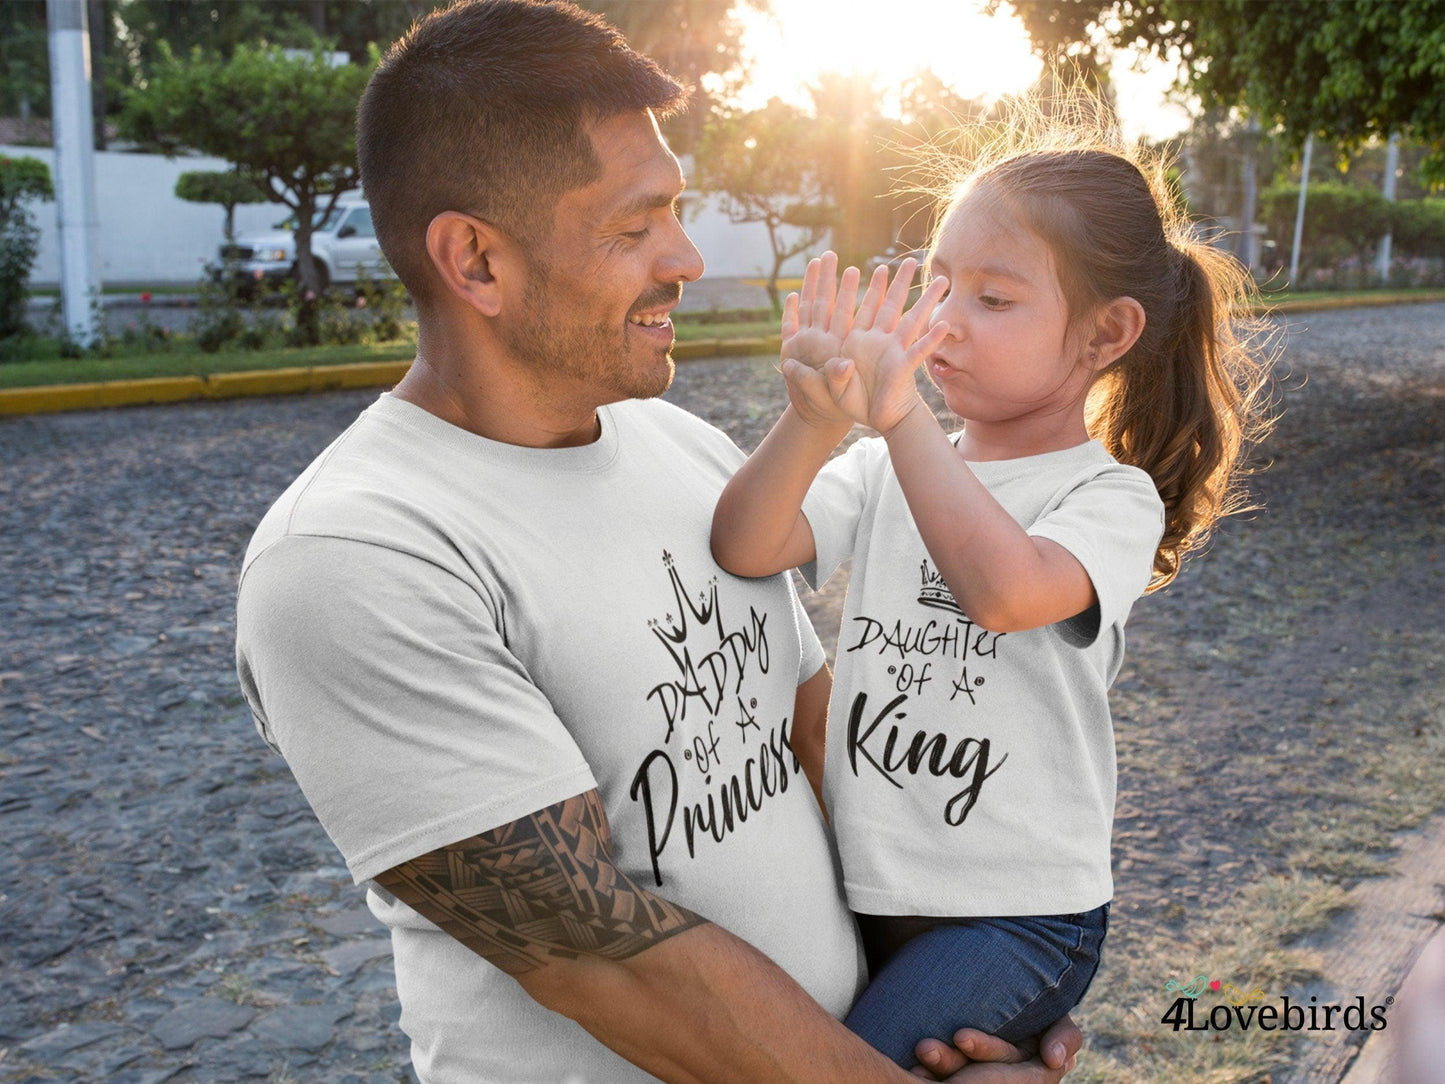 Daddy of a Princess and Daughter of a King Matching Dad and Daughter Shirts - Daddy, Mommy & Me - 4Lovebirds